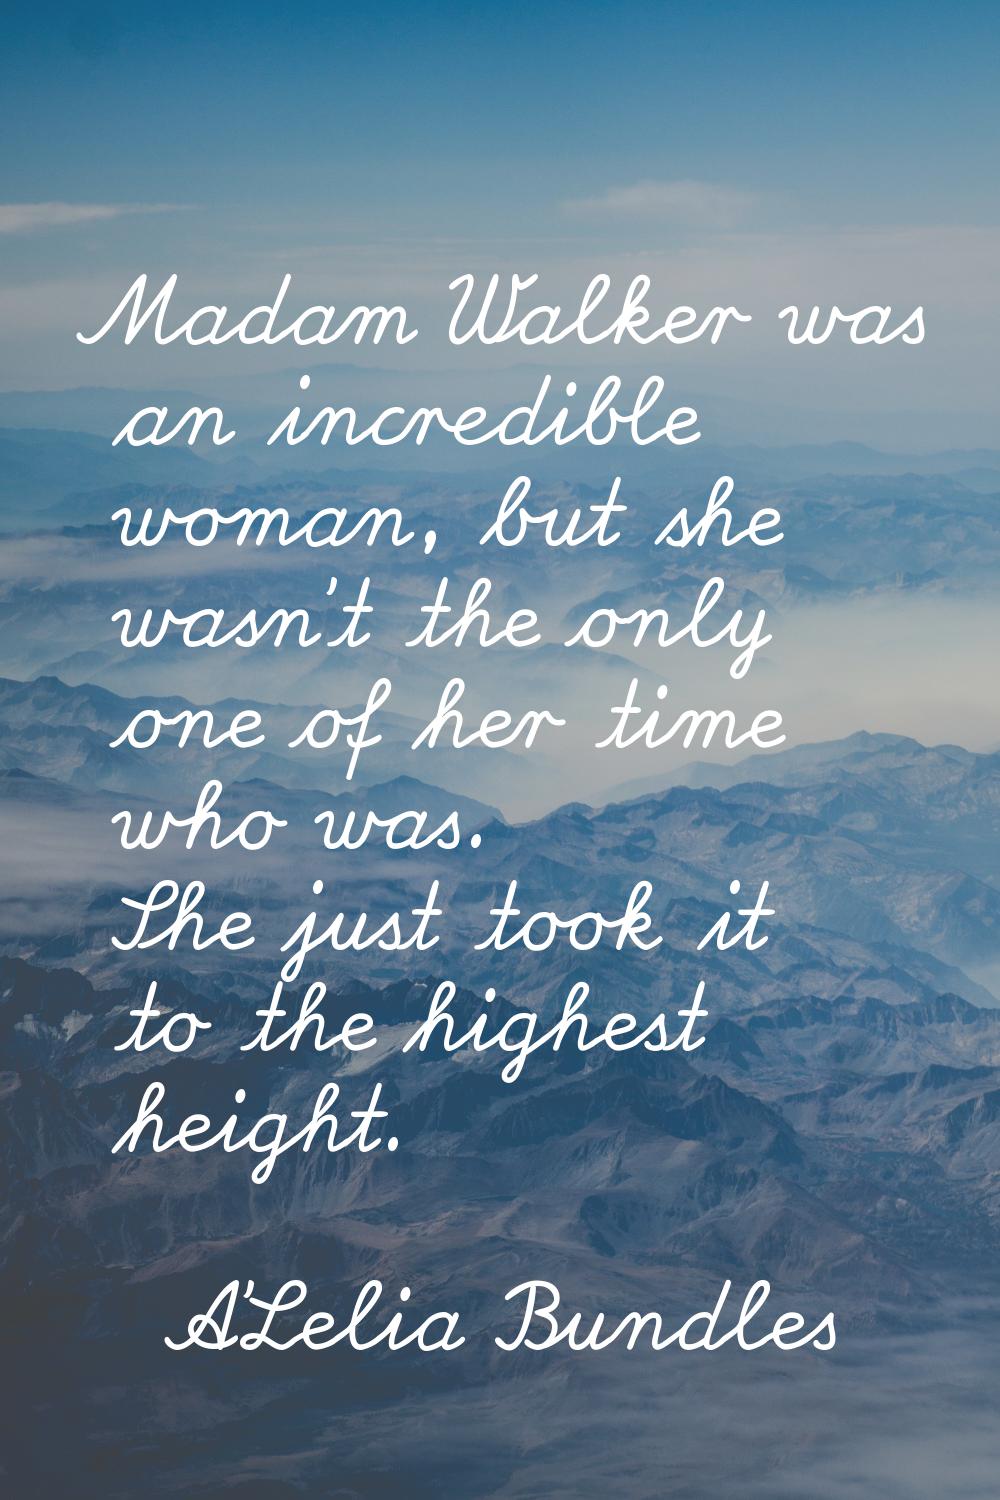 Madam Walker was an incredible woman, but she wasn't the only one of her time who was. She just too